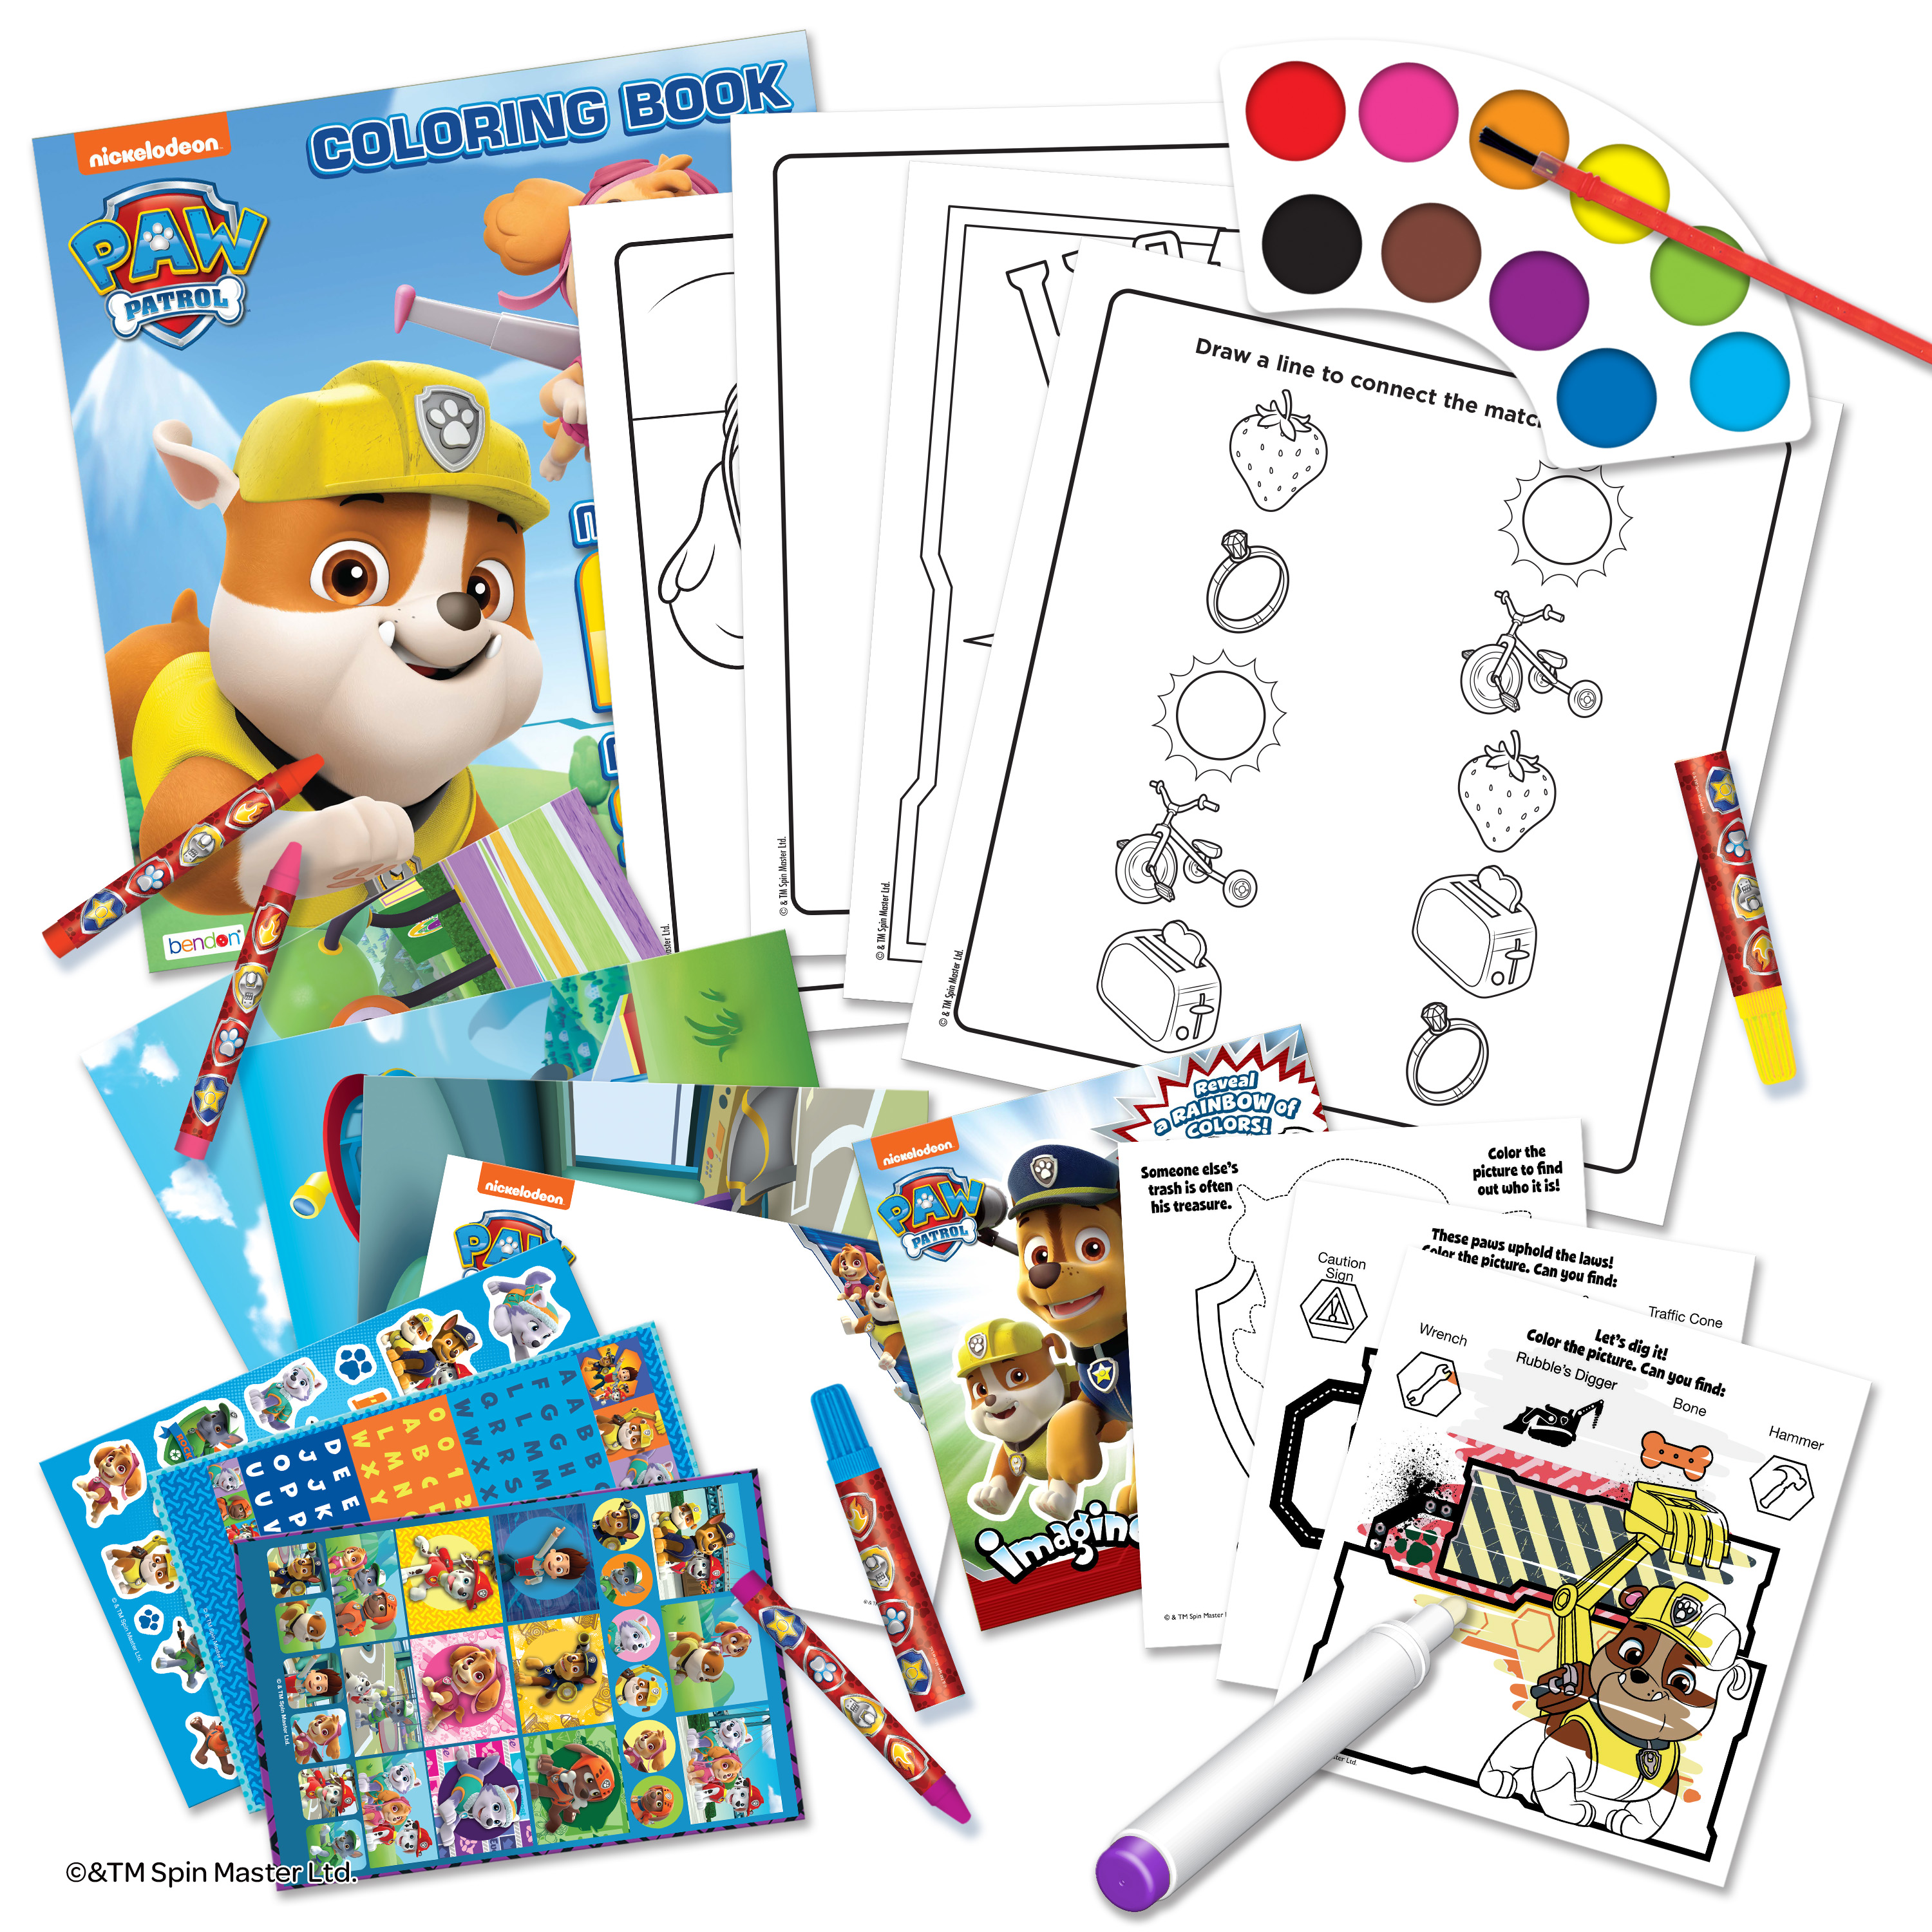 PAW Patrol World Of Art & Activity Kit with an Imagine Ink Book - image 3 of 8